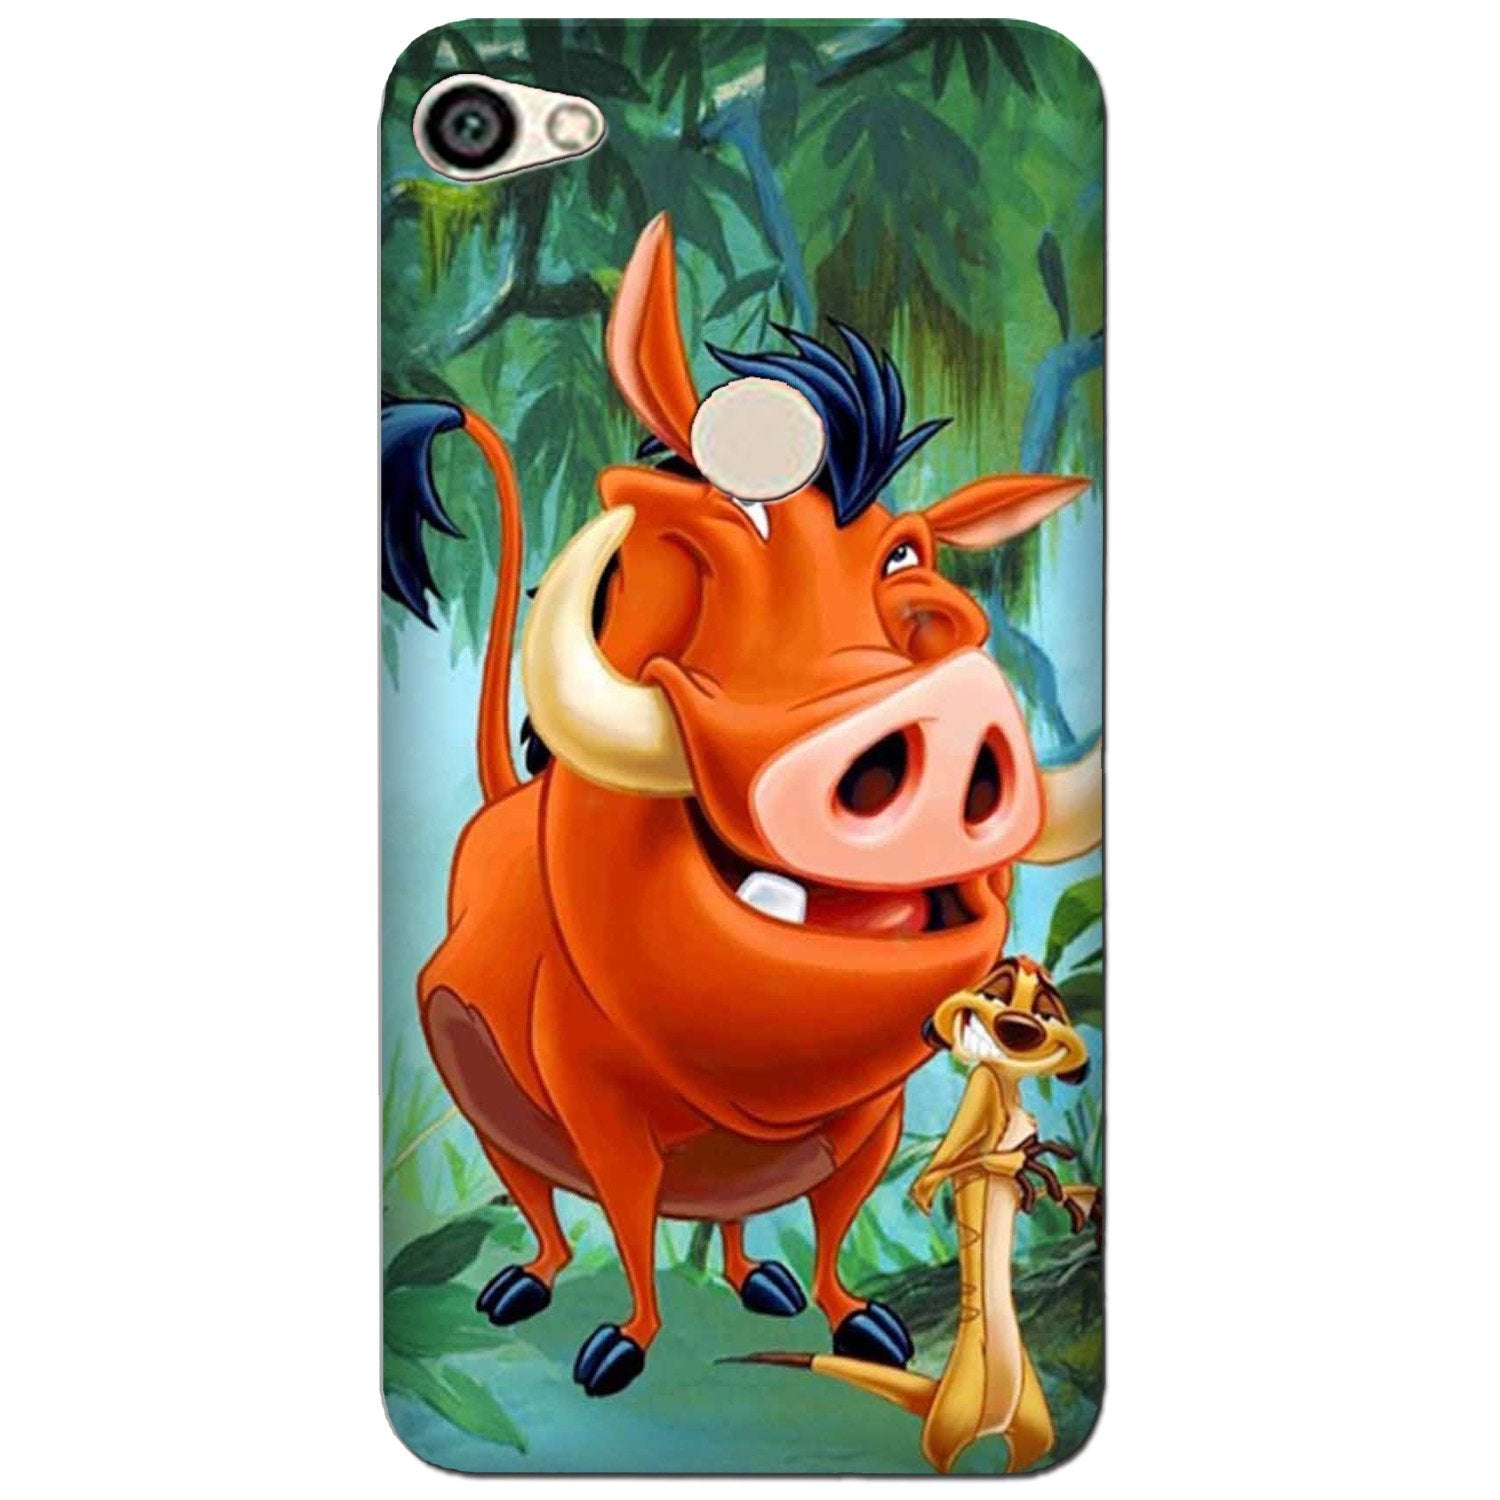 Timon and Pumbaa Mobile Back Case for Oppo A57 (Design - 305)